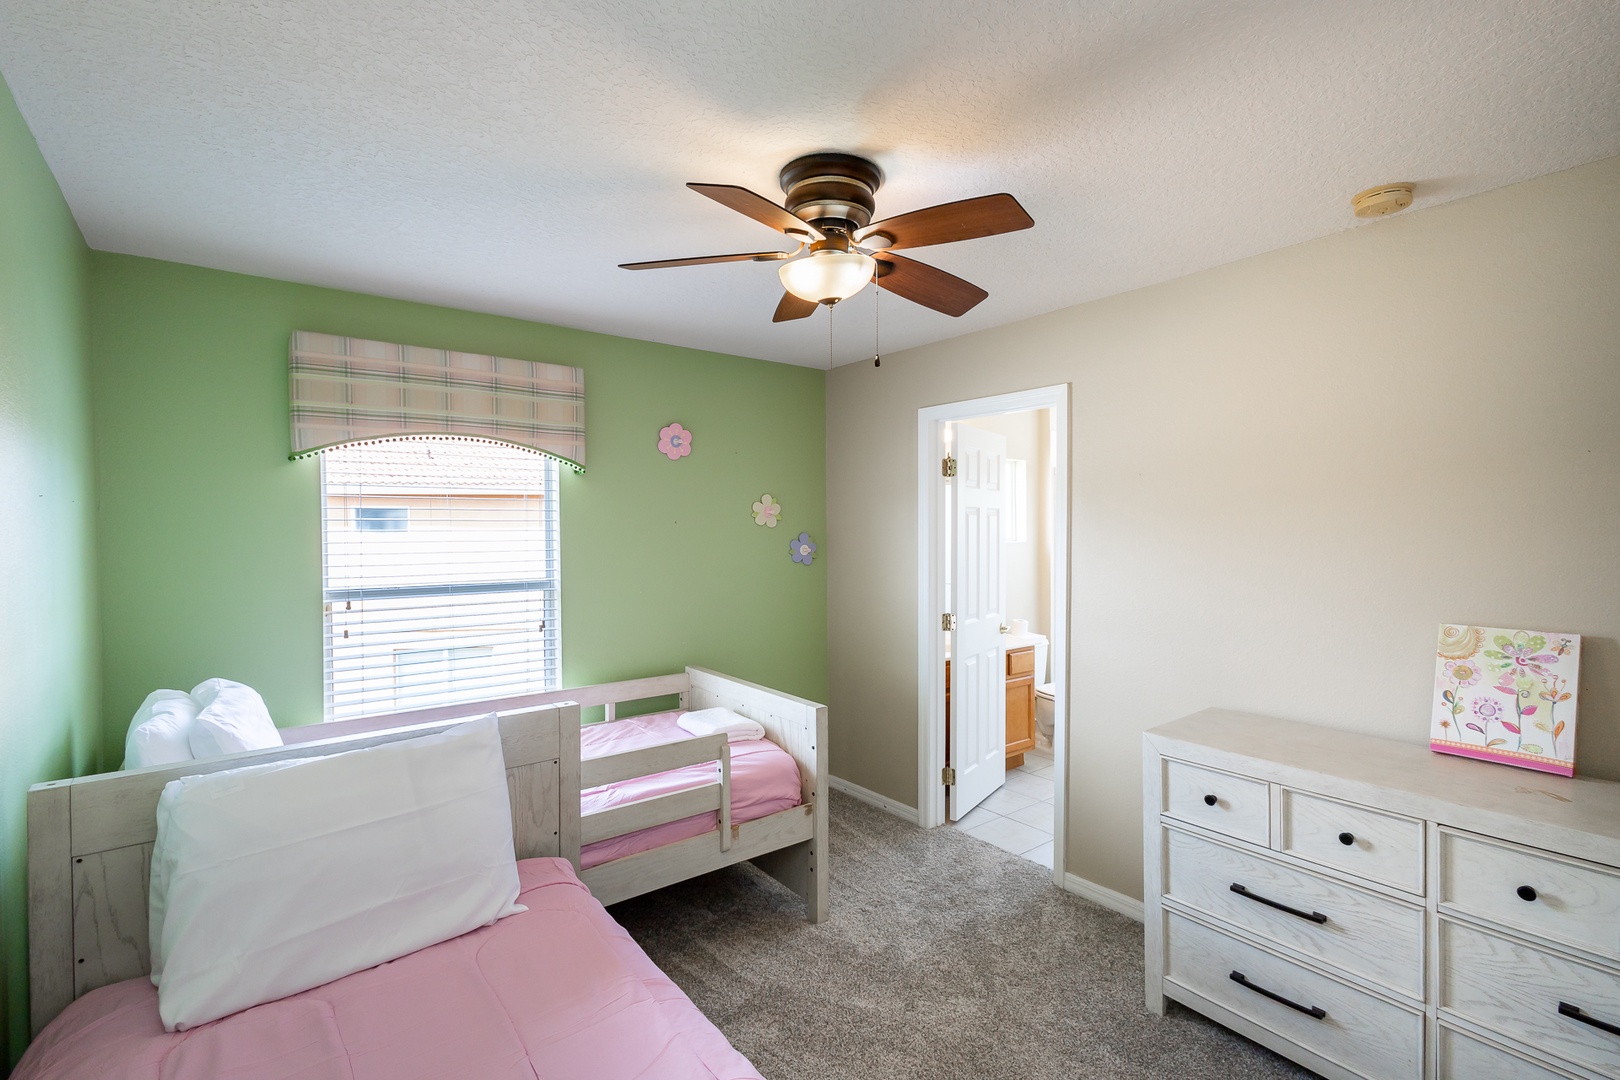 A 2nd twin bedroom offers a pair of twin beds, ceiling fan, & TV